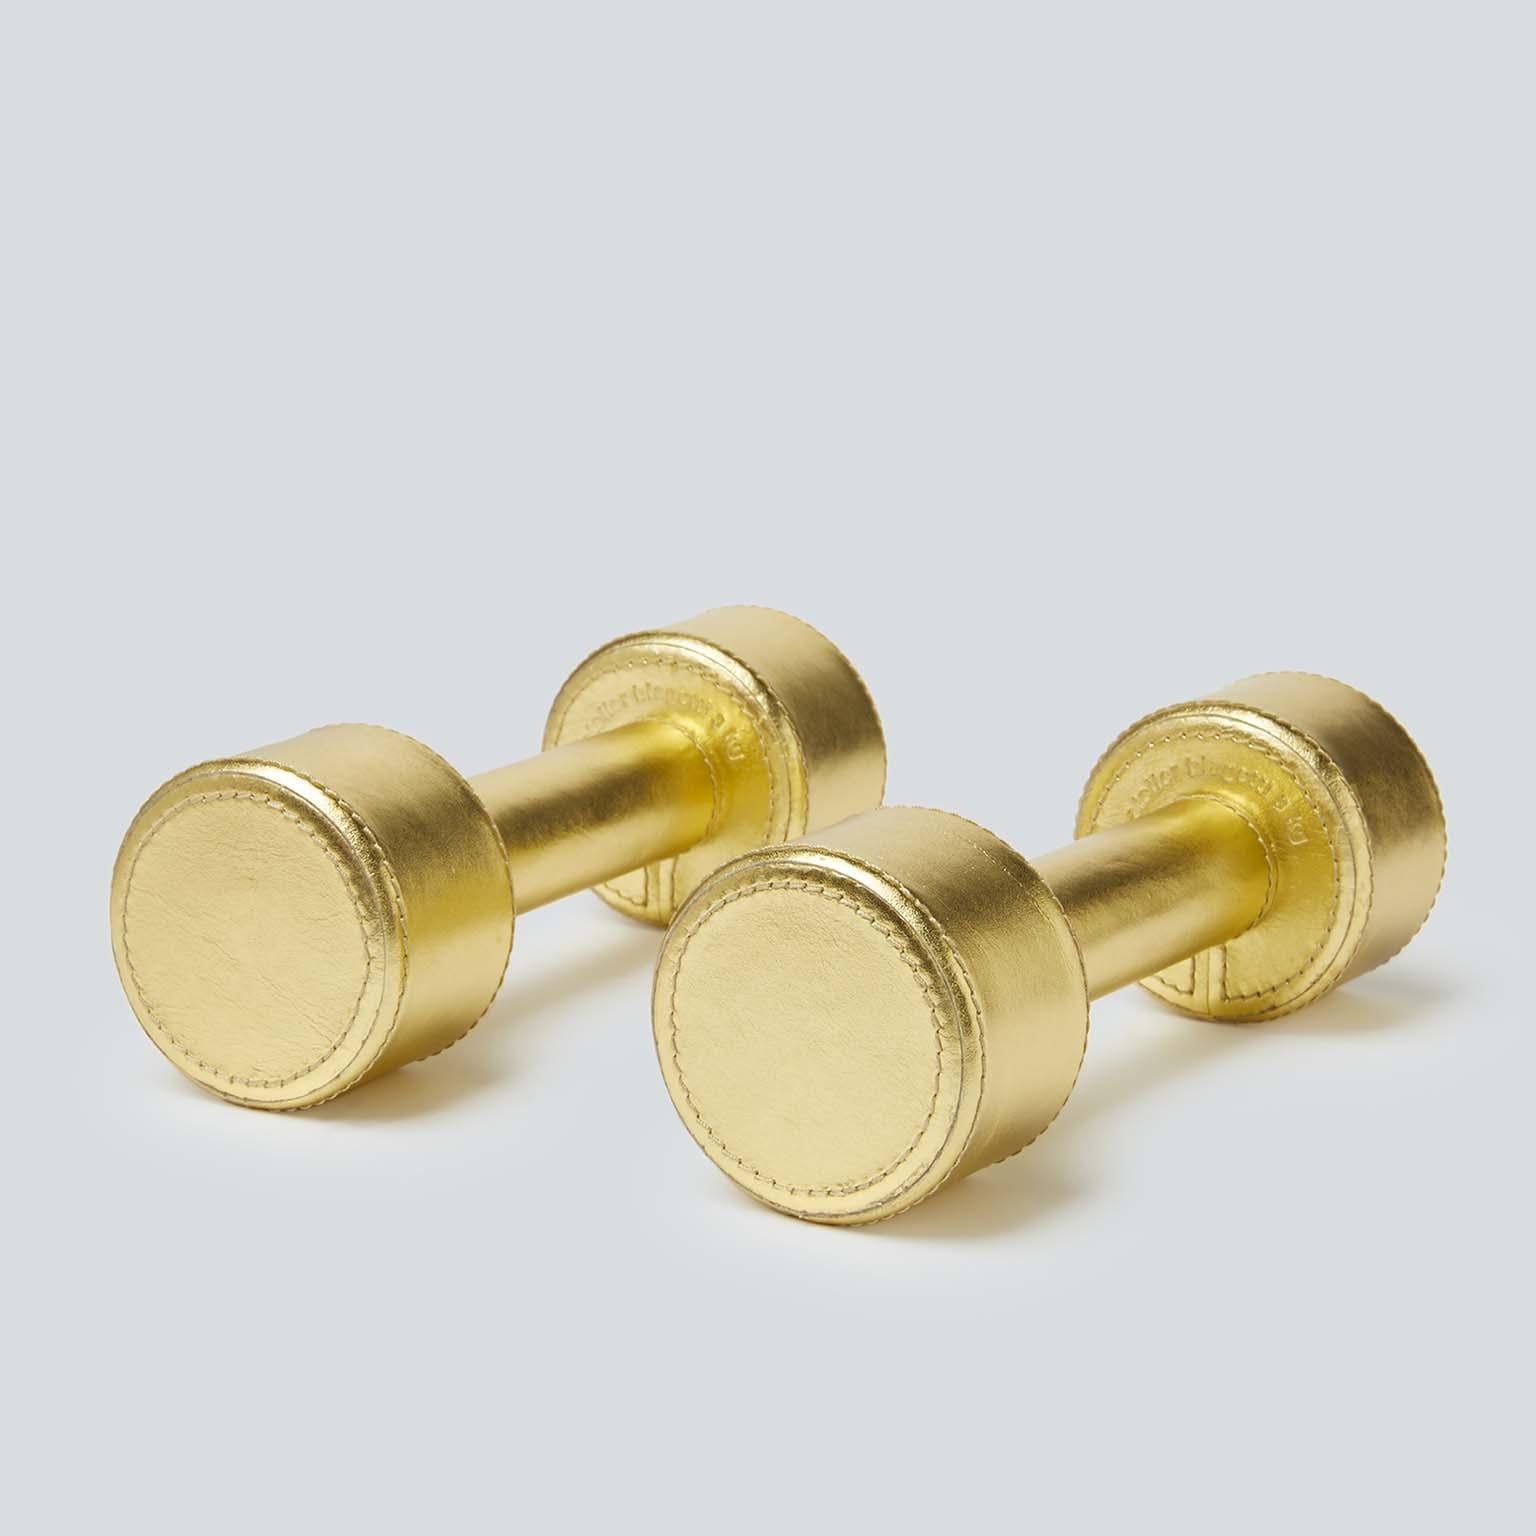 This set of three pairs of dumbbells weighting 1kg, 2kg and 3kg, are real, working sports equipment totally upholstered in gold leather to lend you some luxury while sweating it out. Embracing the Body Building concept, they are the perfect balance